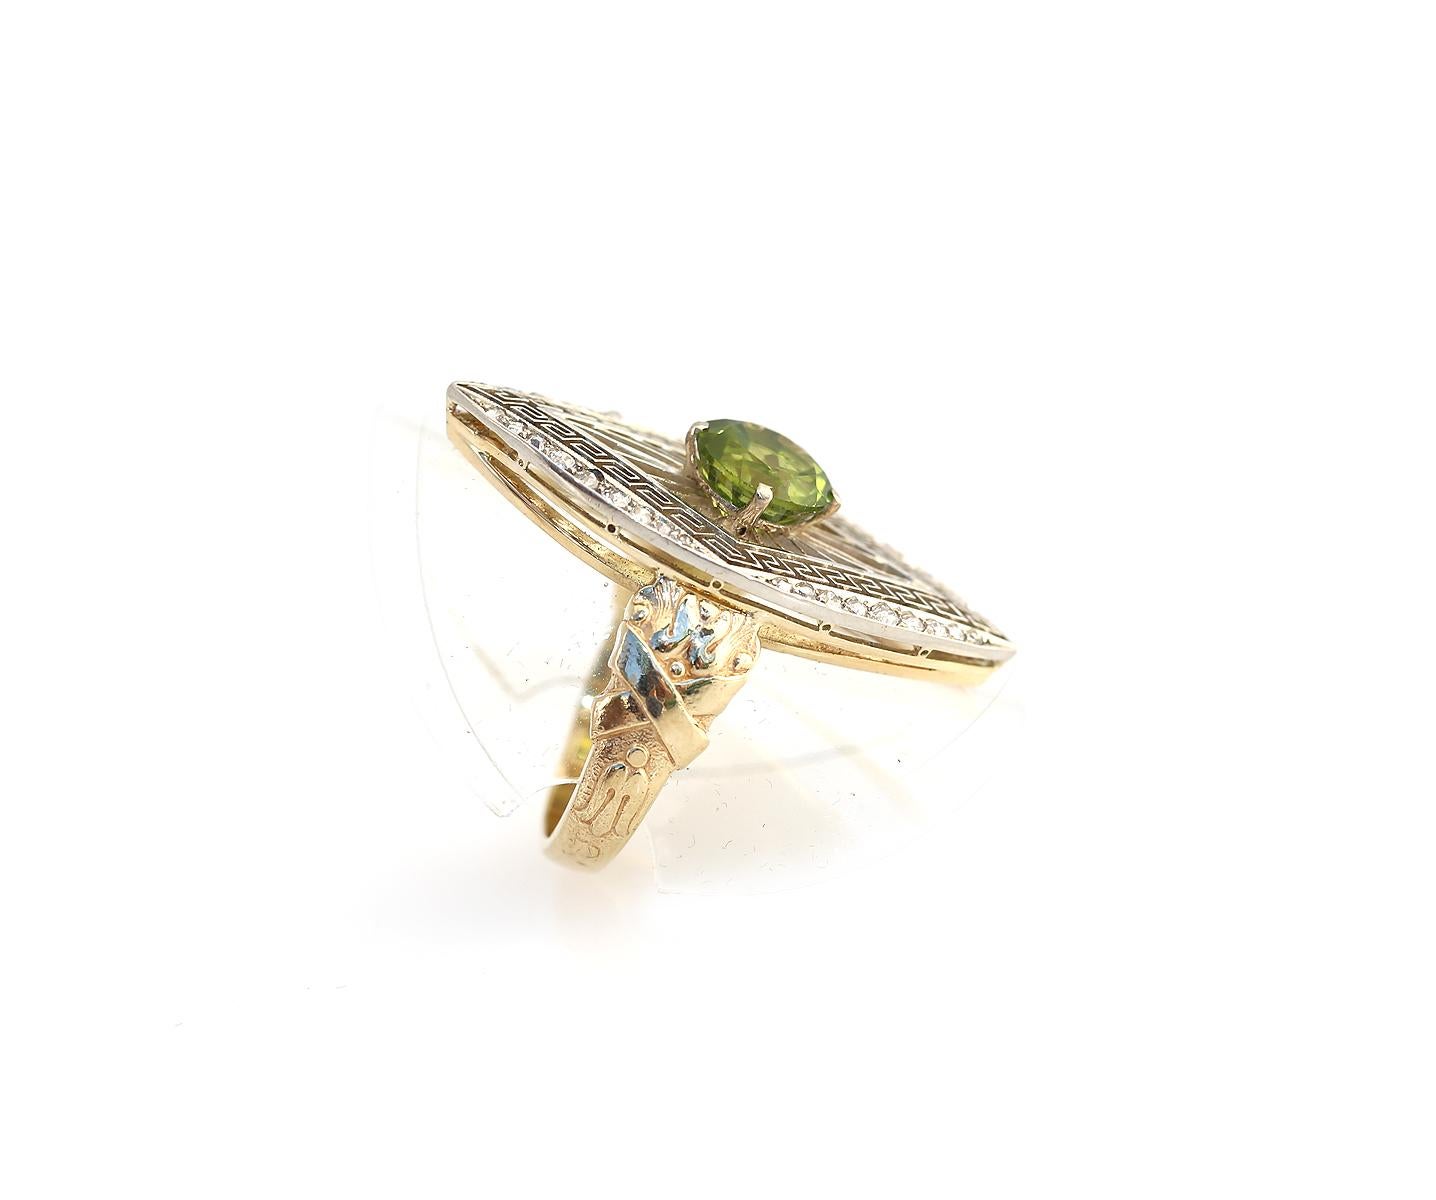 2.7 Ct Peridot Platinum Yellow Gold European Ring, 1900 In Good Condition For Sale In Herzelia, Tel Aviv